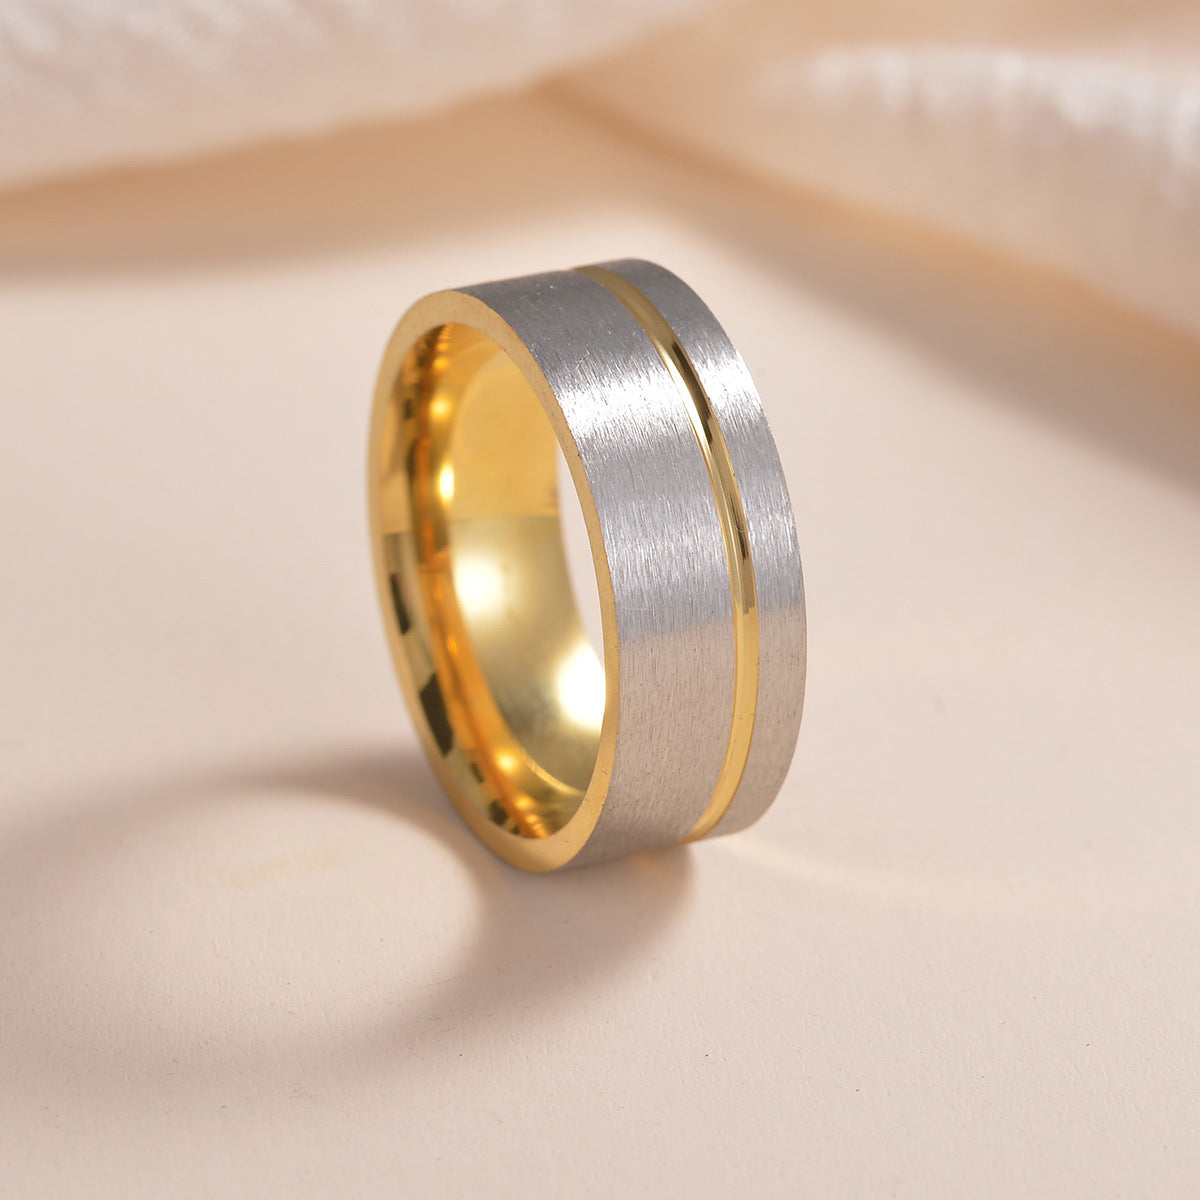 8mm Stainless Steel Men's Ring with Frosted Gold and Silver Finish